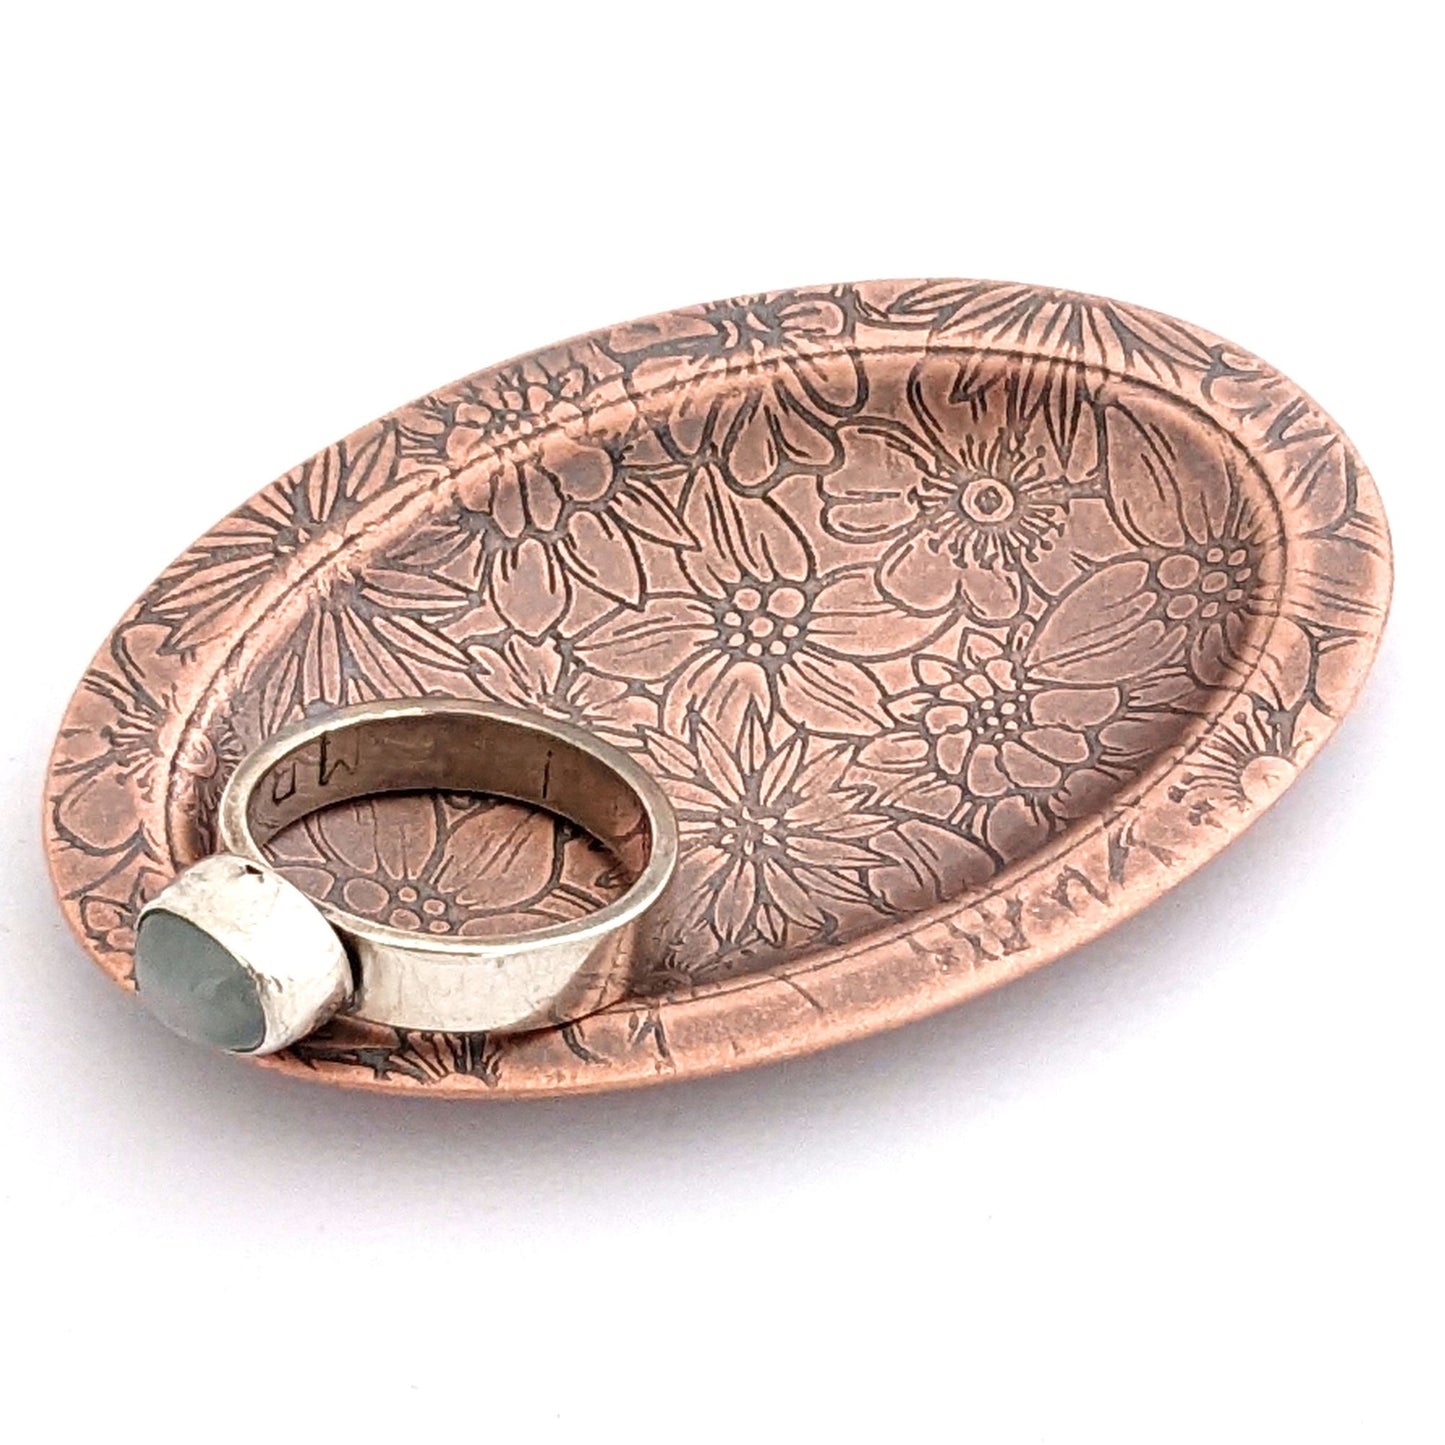 Copper oval ring dish with repeating pattern of assortment of flowers.  Dish is 2 inches by three inches with a raised lip.